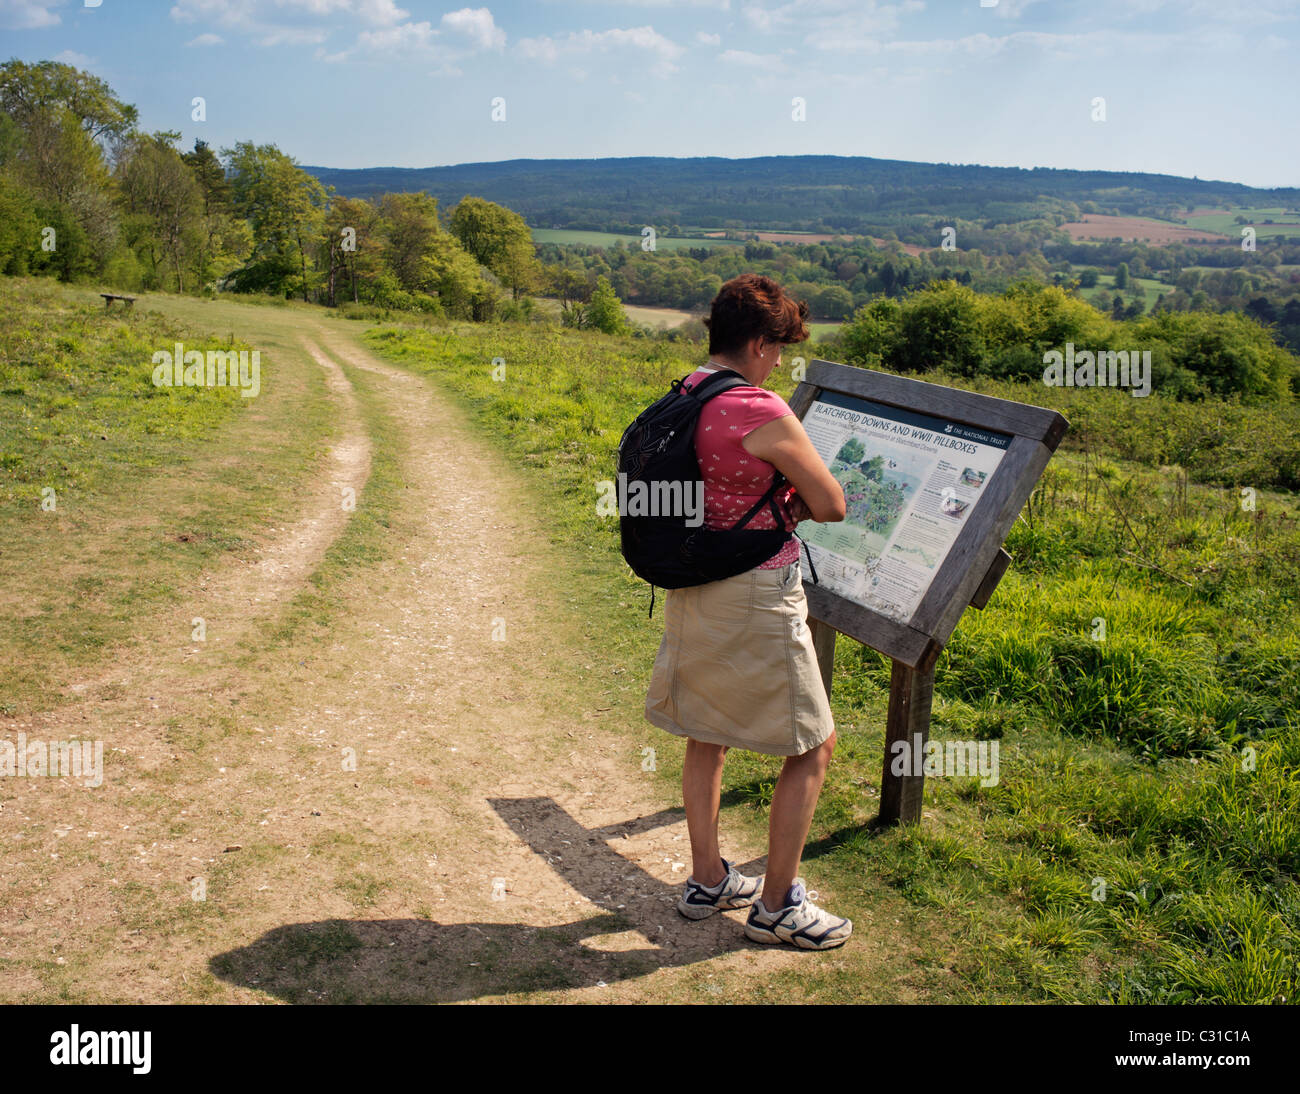 Woman looking at the Blatchford Downs information board. Banque D'Images